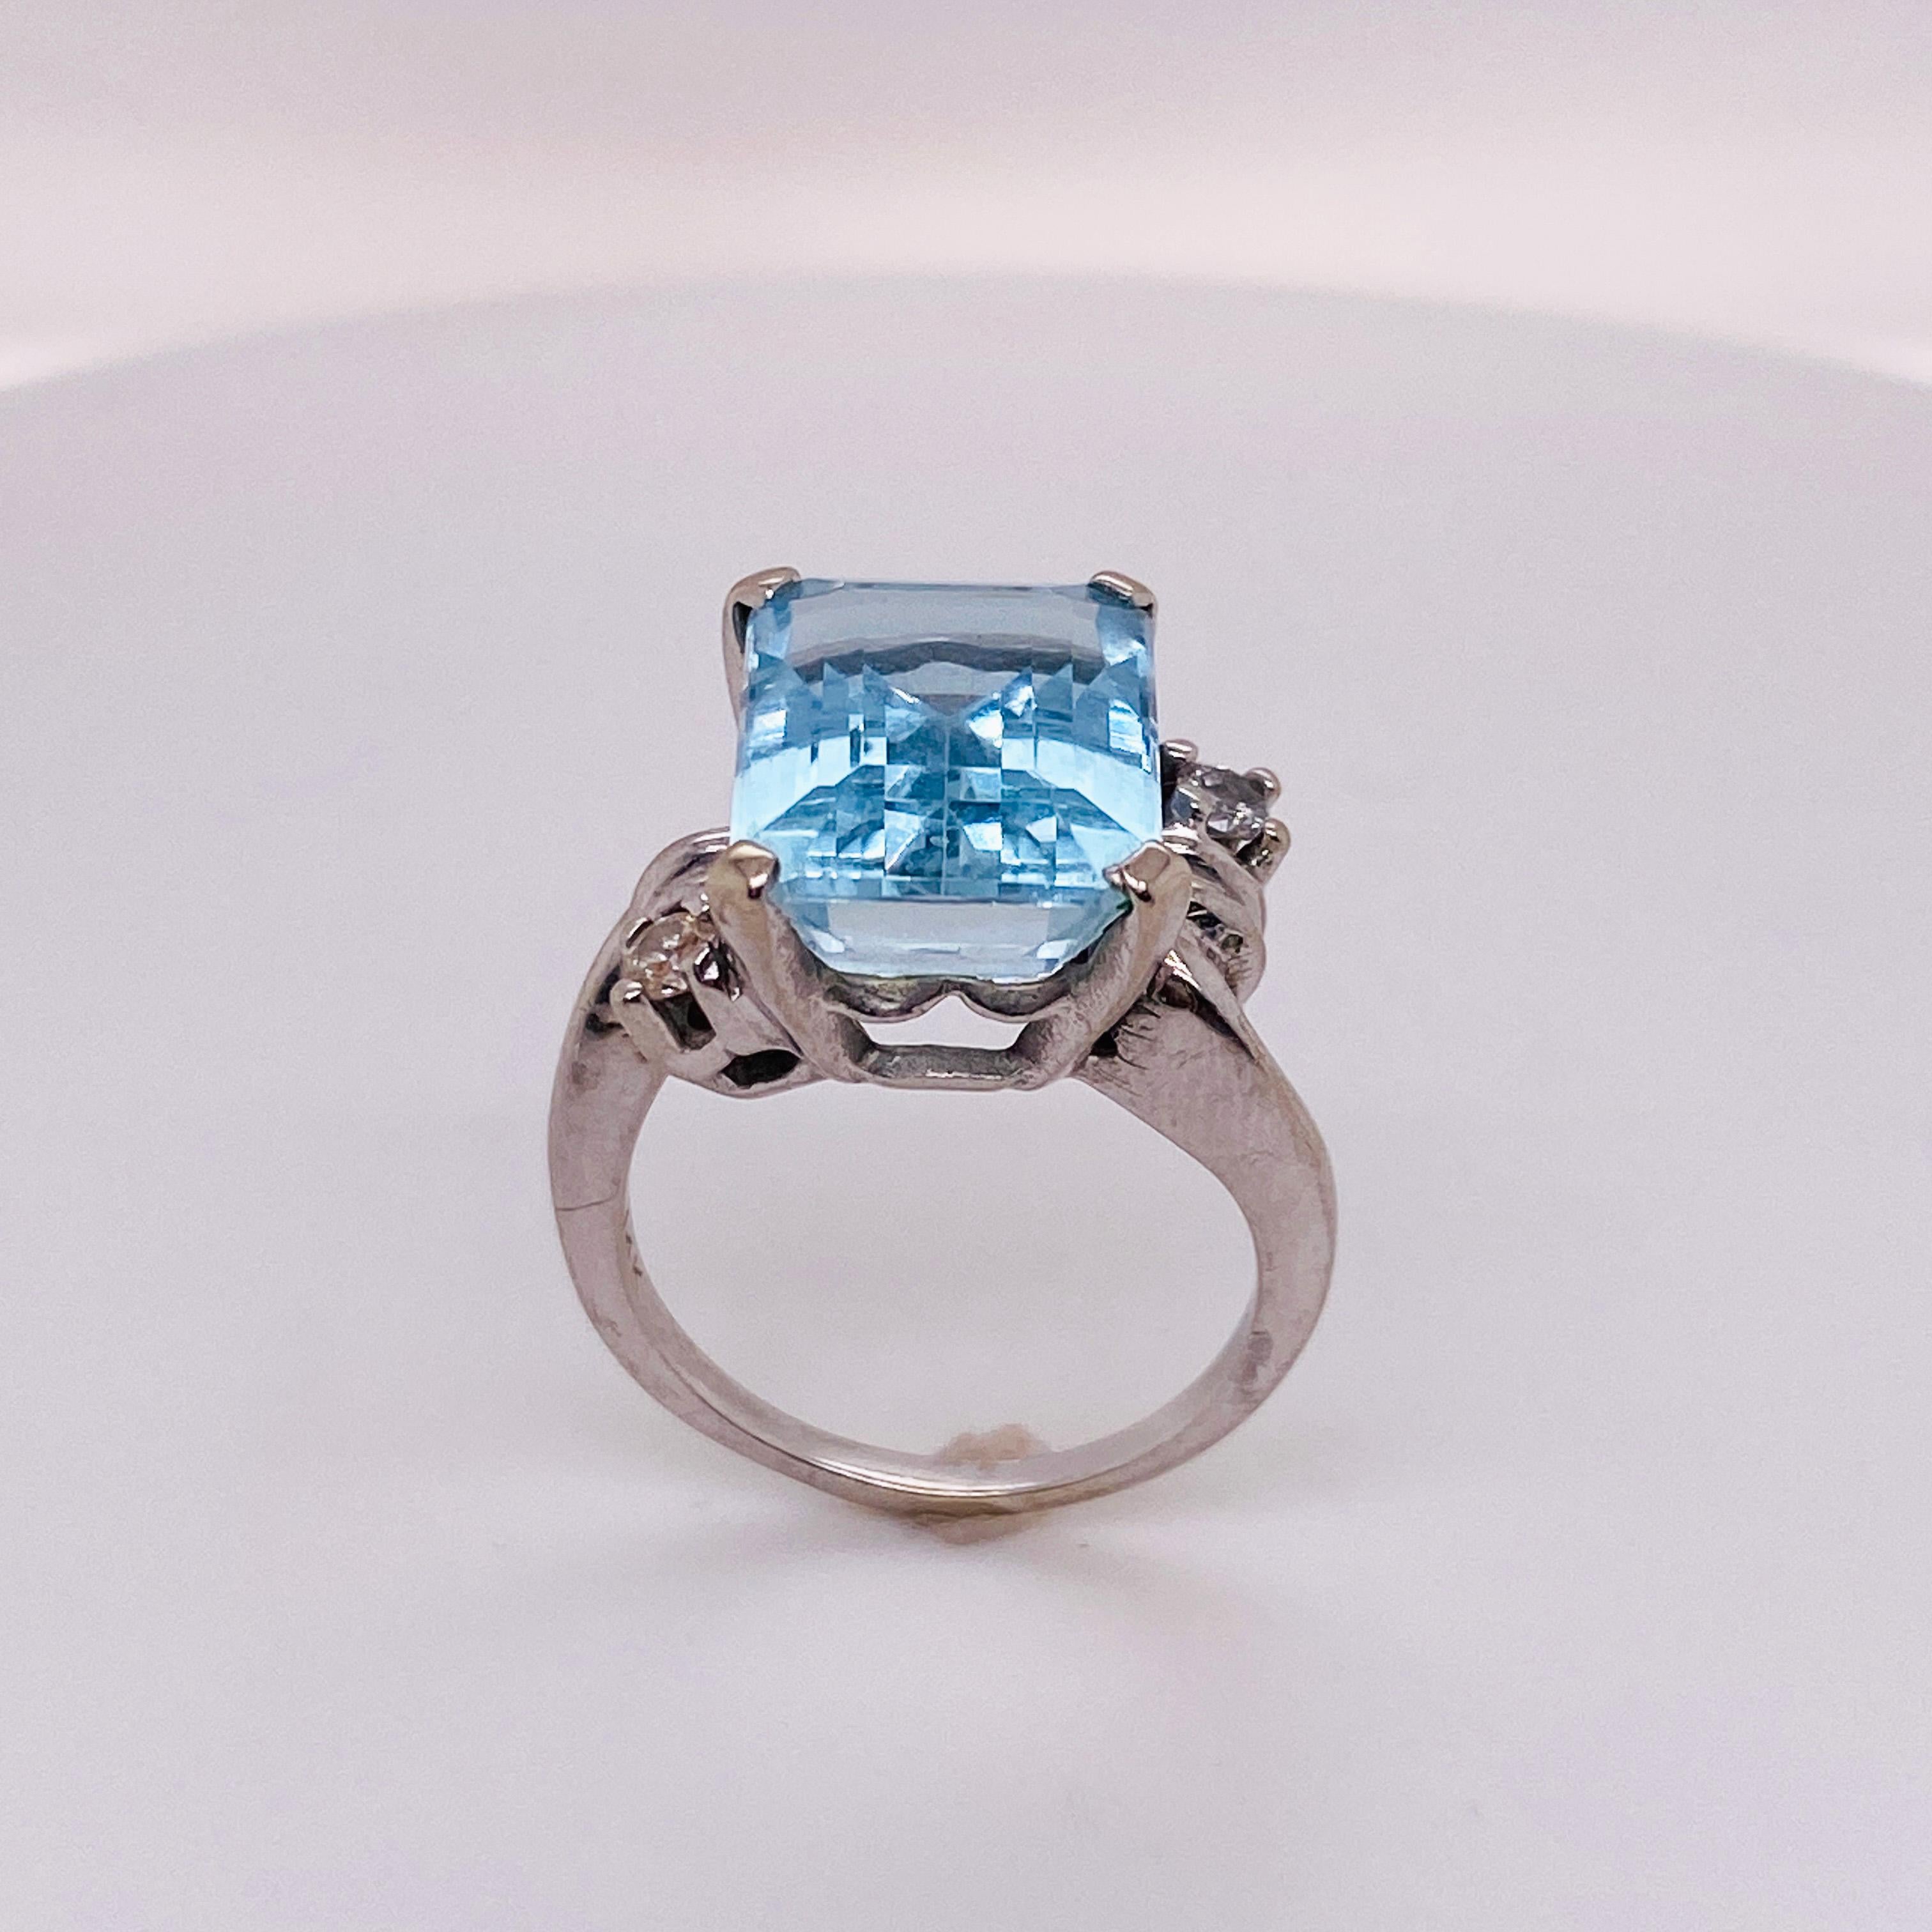 Emerald Cut Art Deco Aquamarine Ring, 6.2 Carats with Diamonds in 14K White Gold For Sale